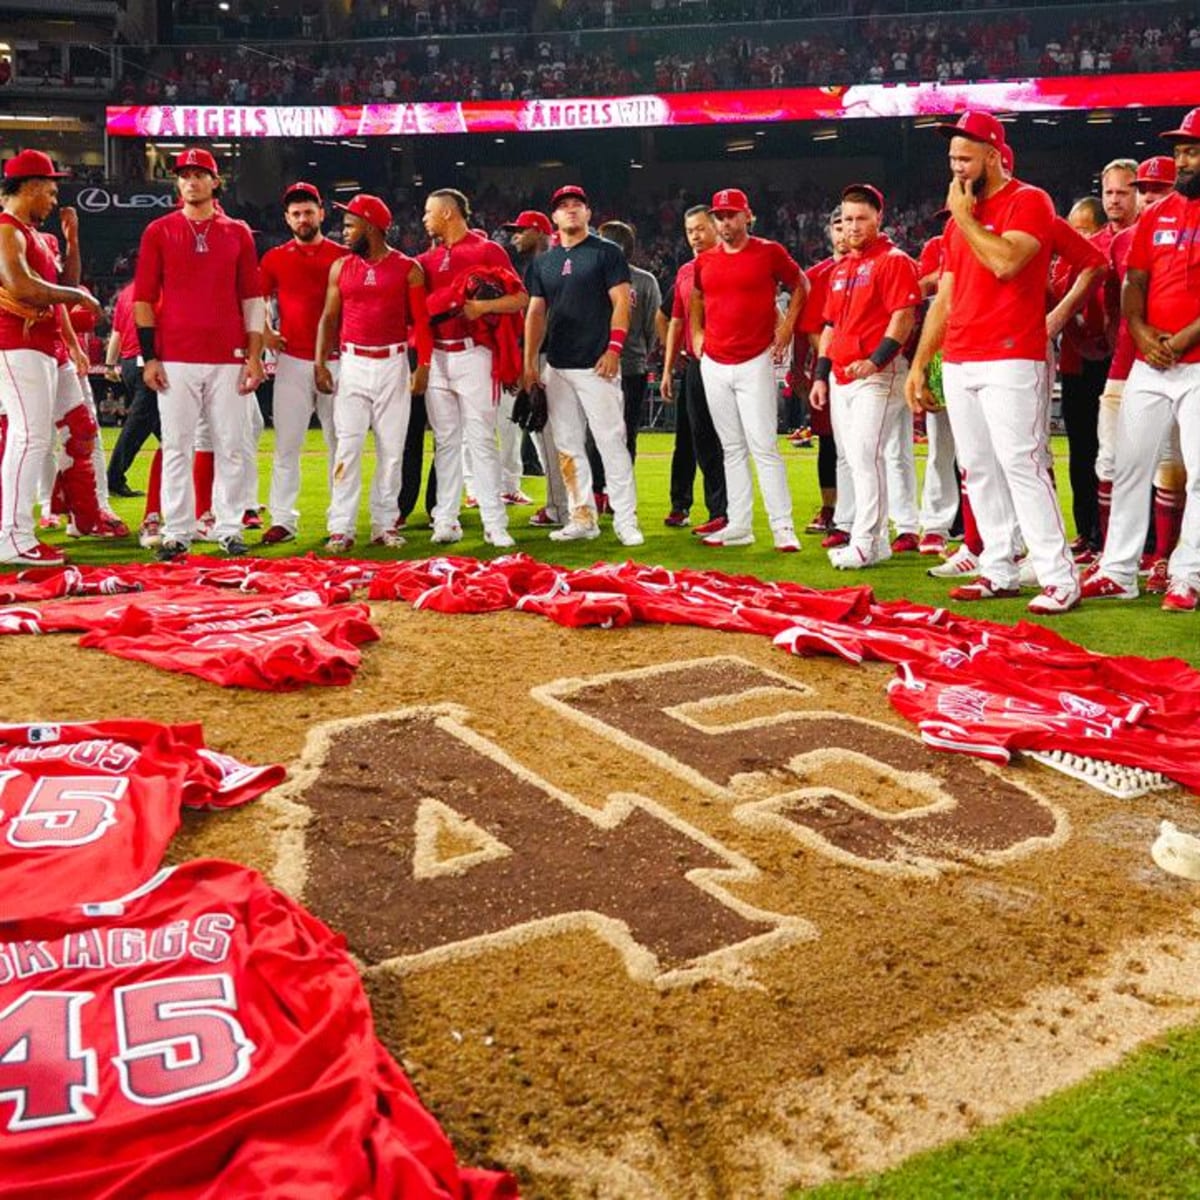 Tyler Skaggs to be honored by nine players during Players' Weekend